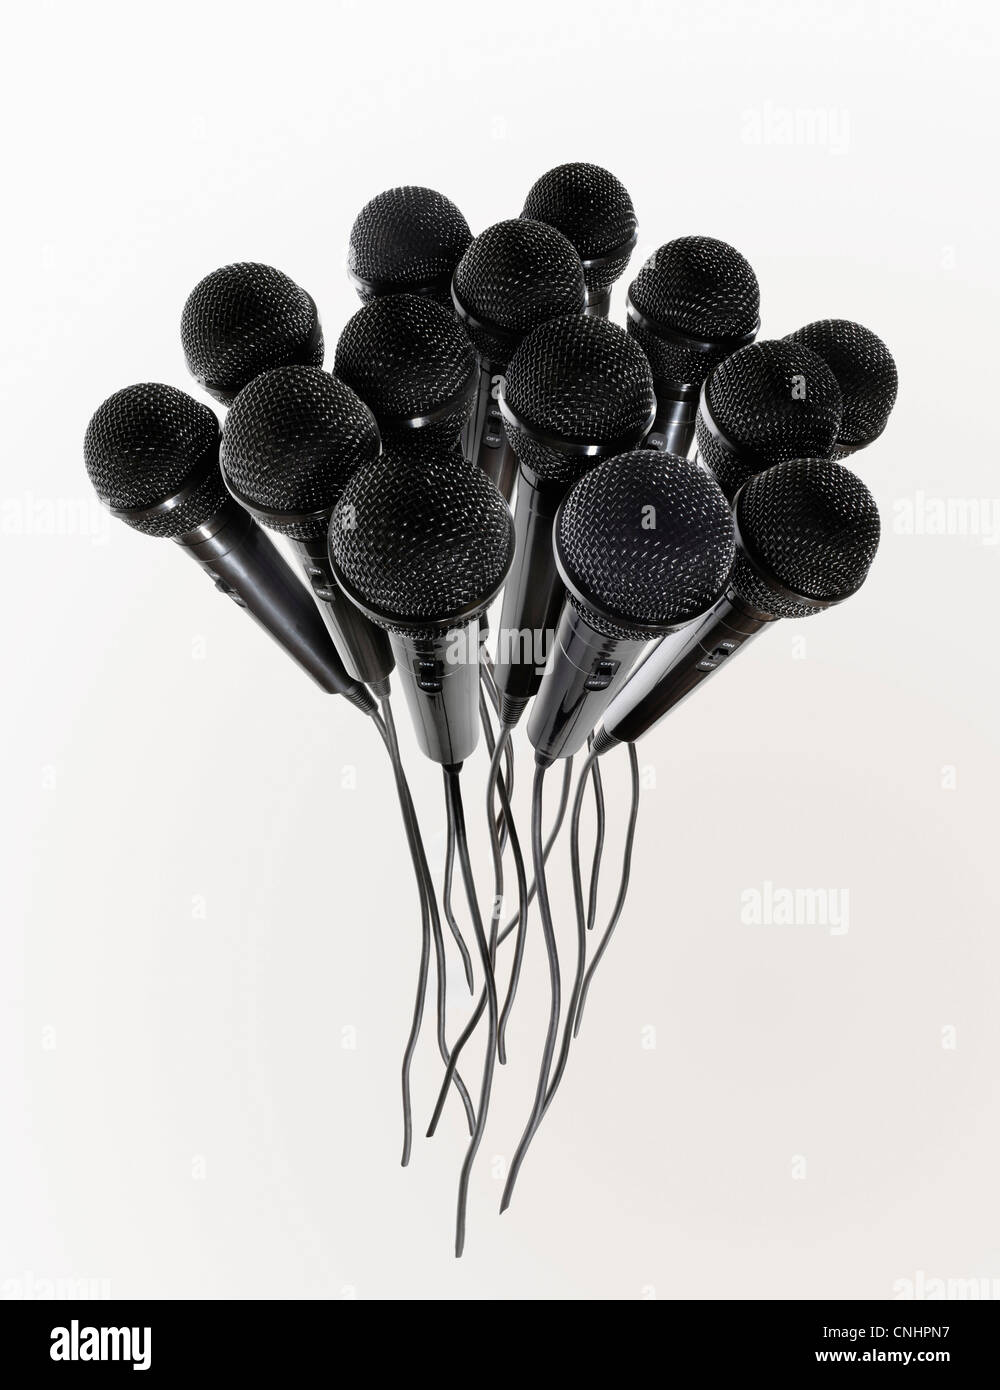 Group of microphones Stock Photo